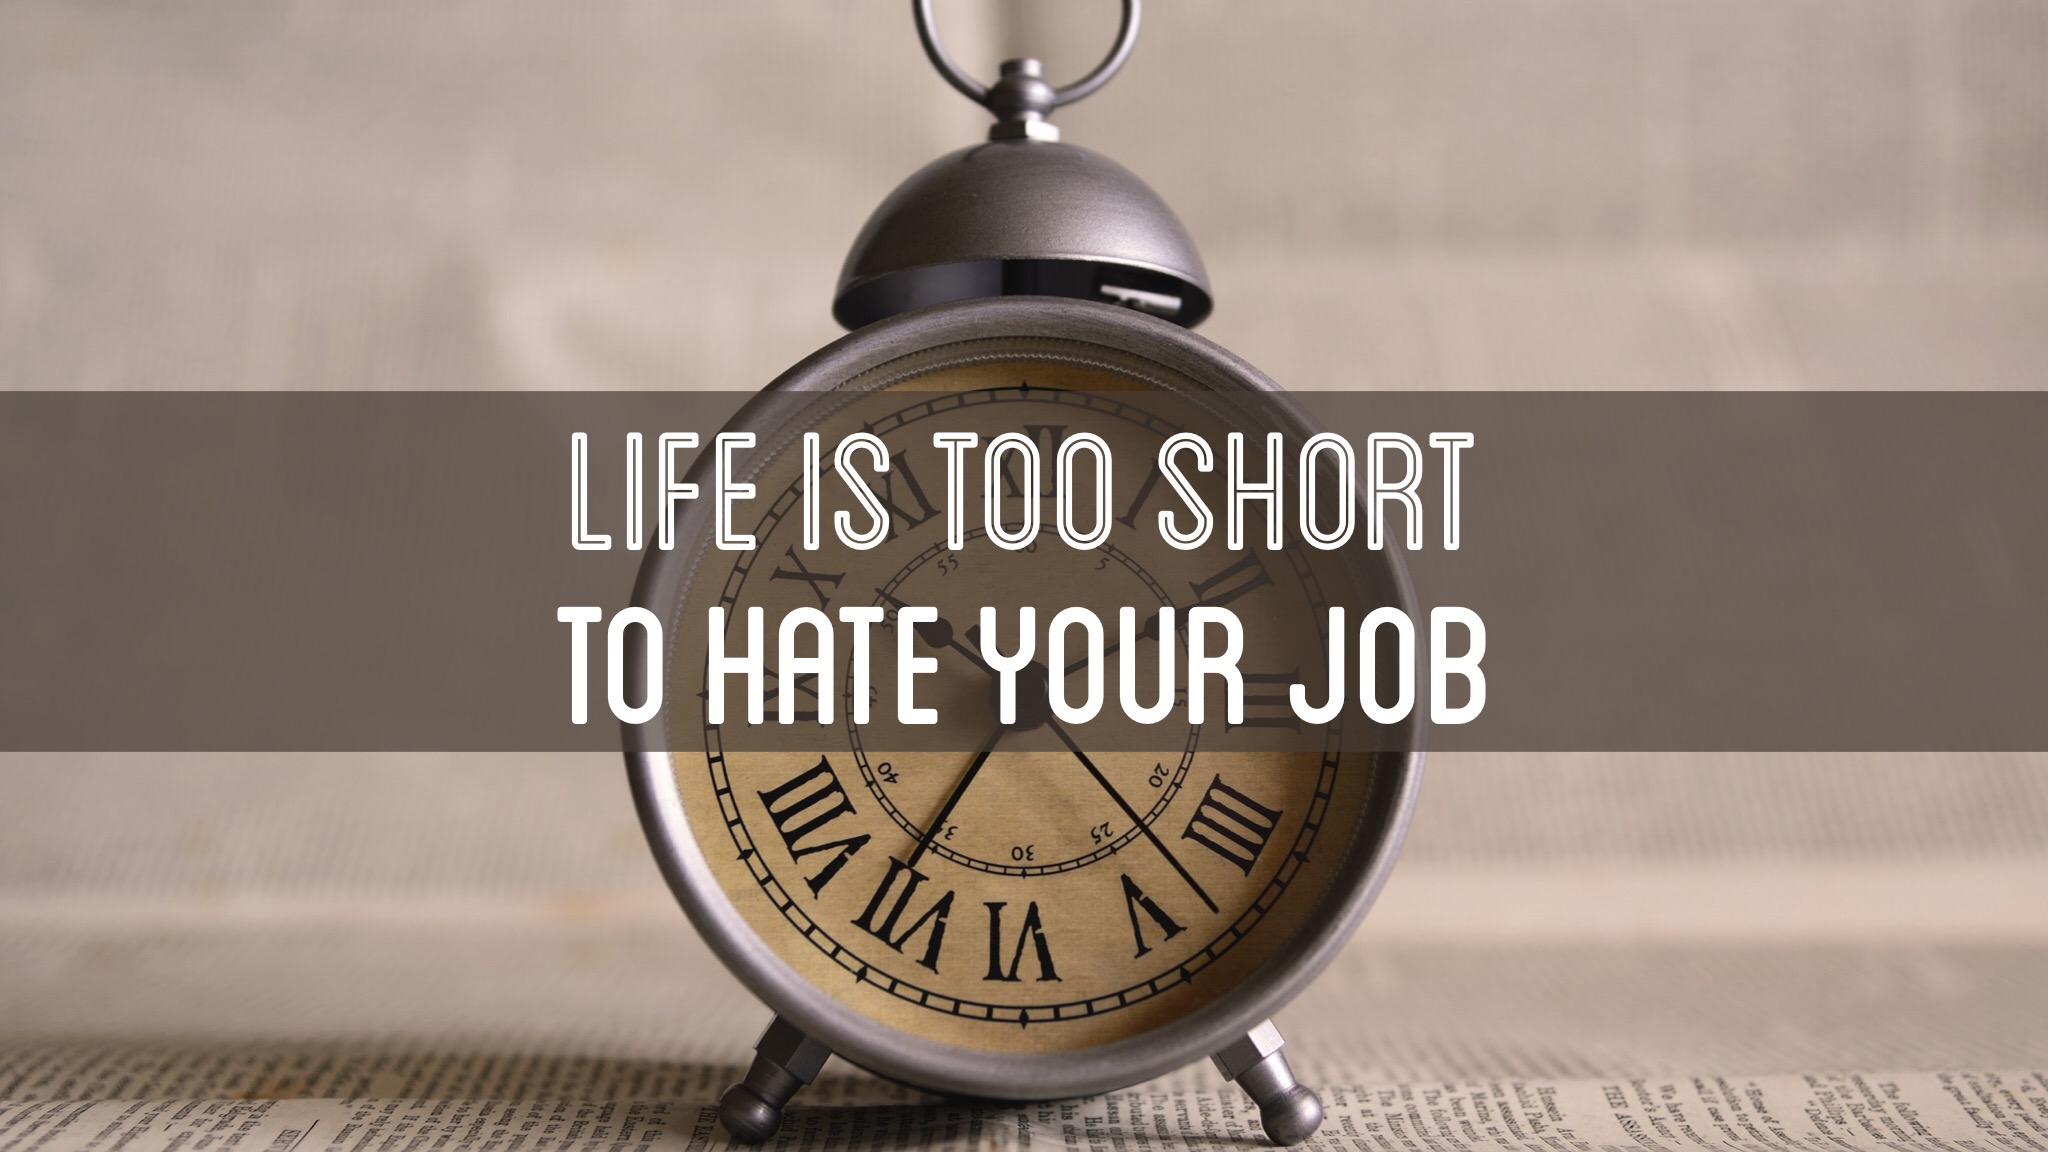 Life hates me. Life is too short, don’t procrastinate!. Life is too short to Traffic. Life is too short Cover.